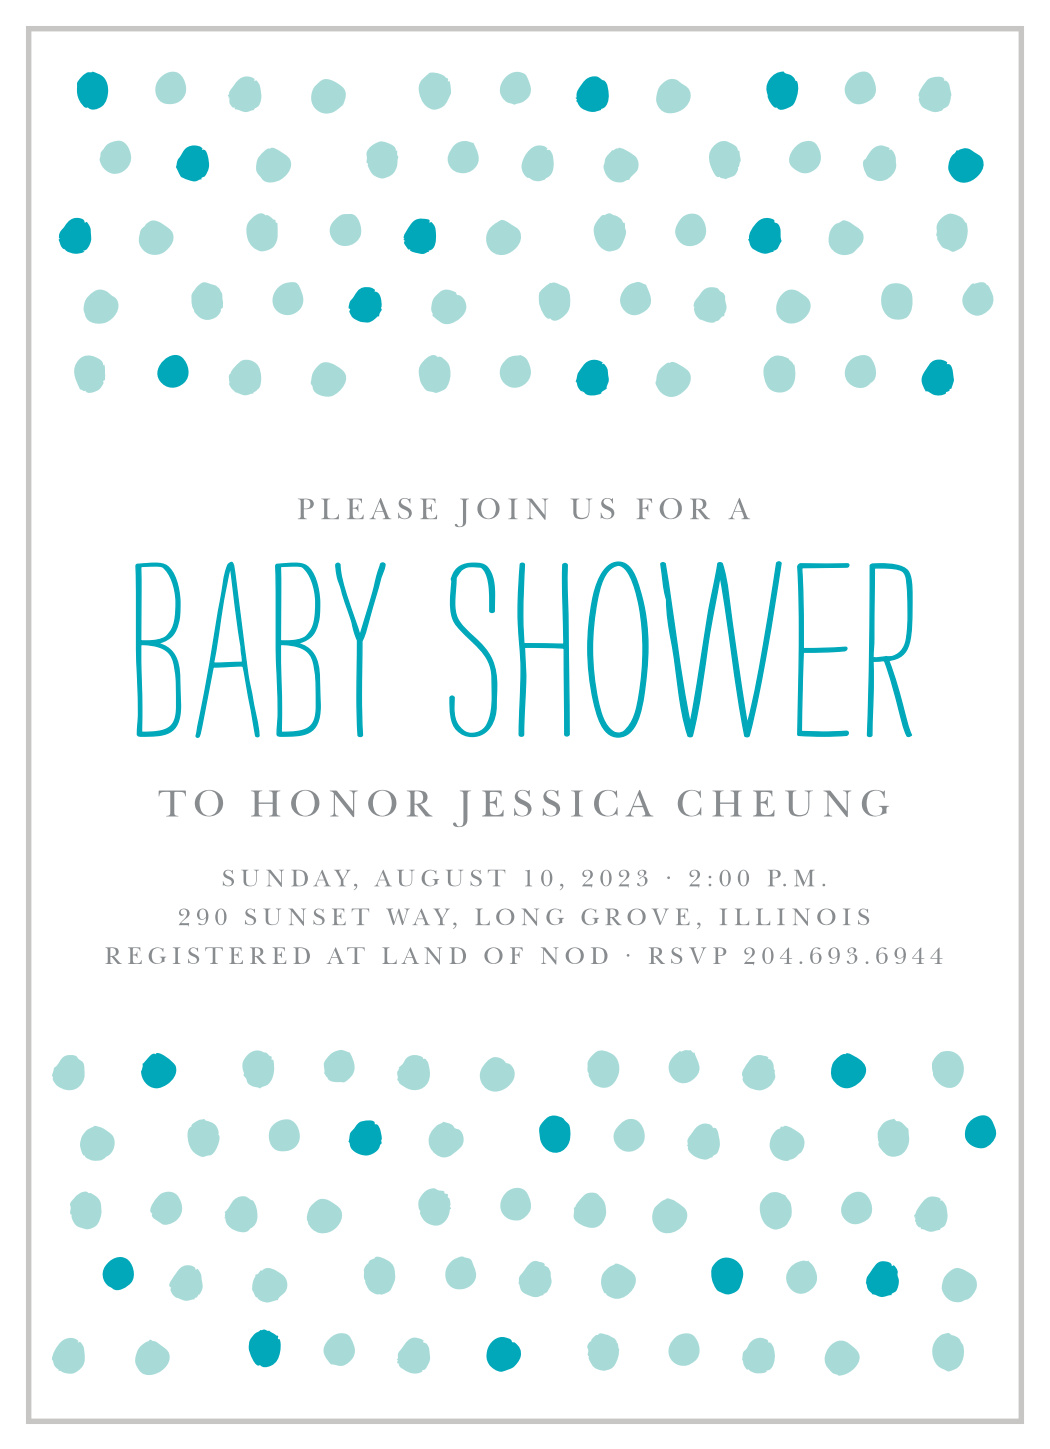 Painted Dots Baby Shower Invitations